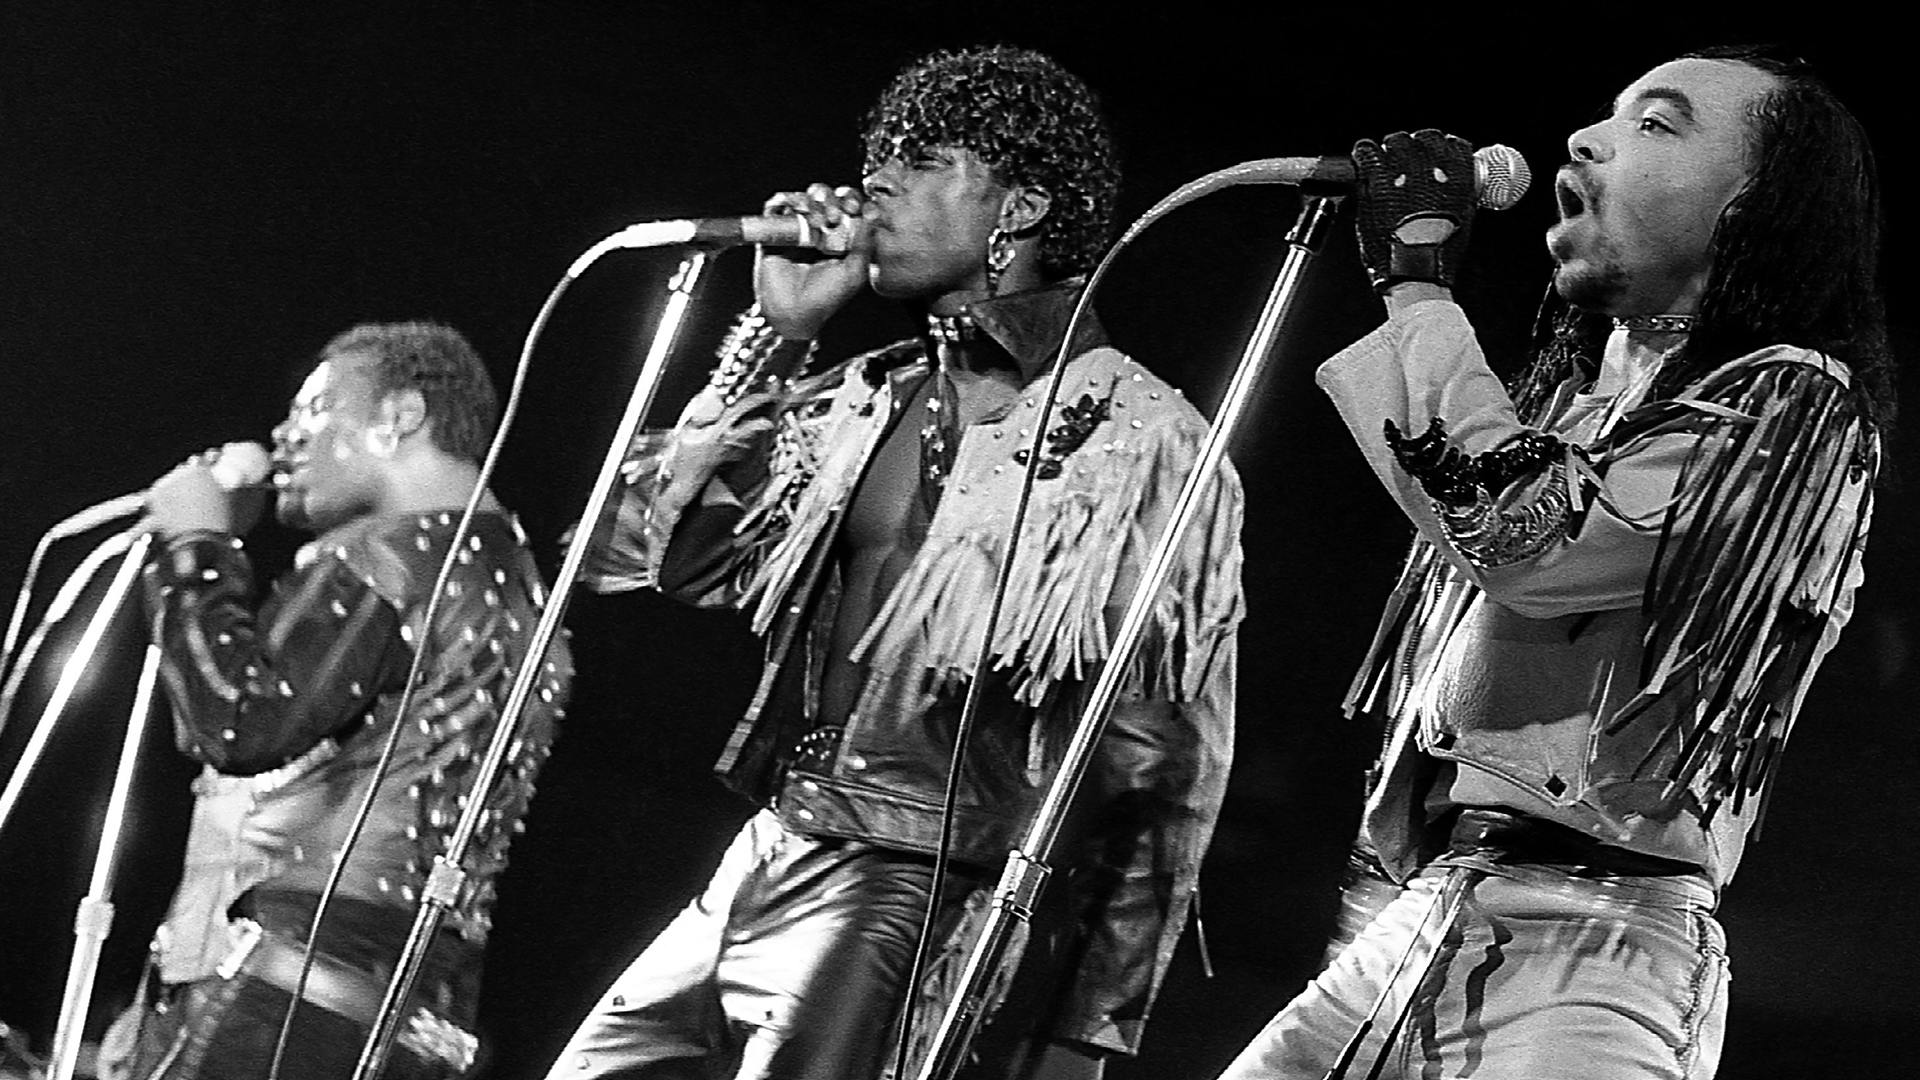 Rahiem, Lavon and Kidd Creole from Grandmaster Flash & The Furious Five performs at the U.I.C. Pavilion in Chicago, Illinois in January 1985. (Photo By Raymond Boyd/Getty Images)